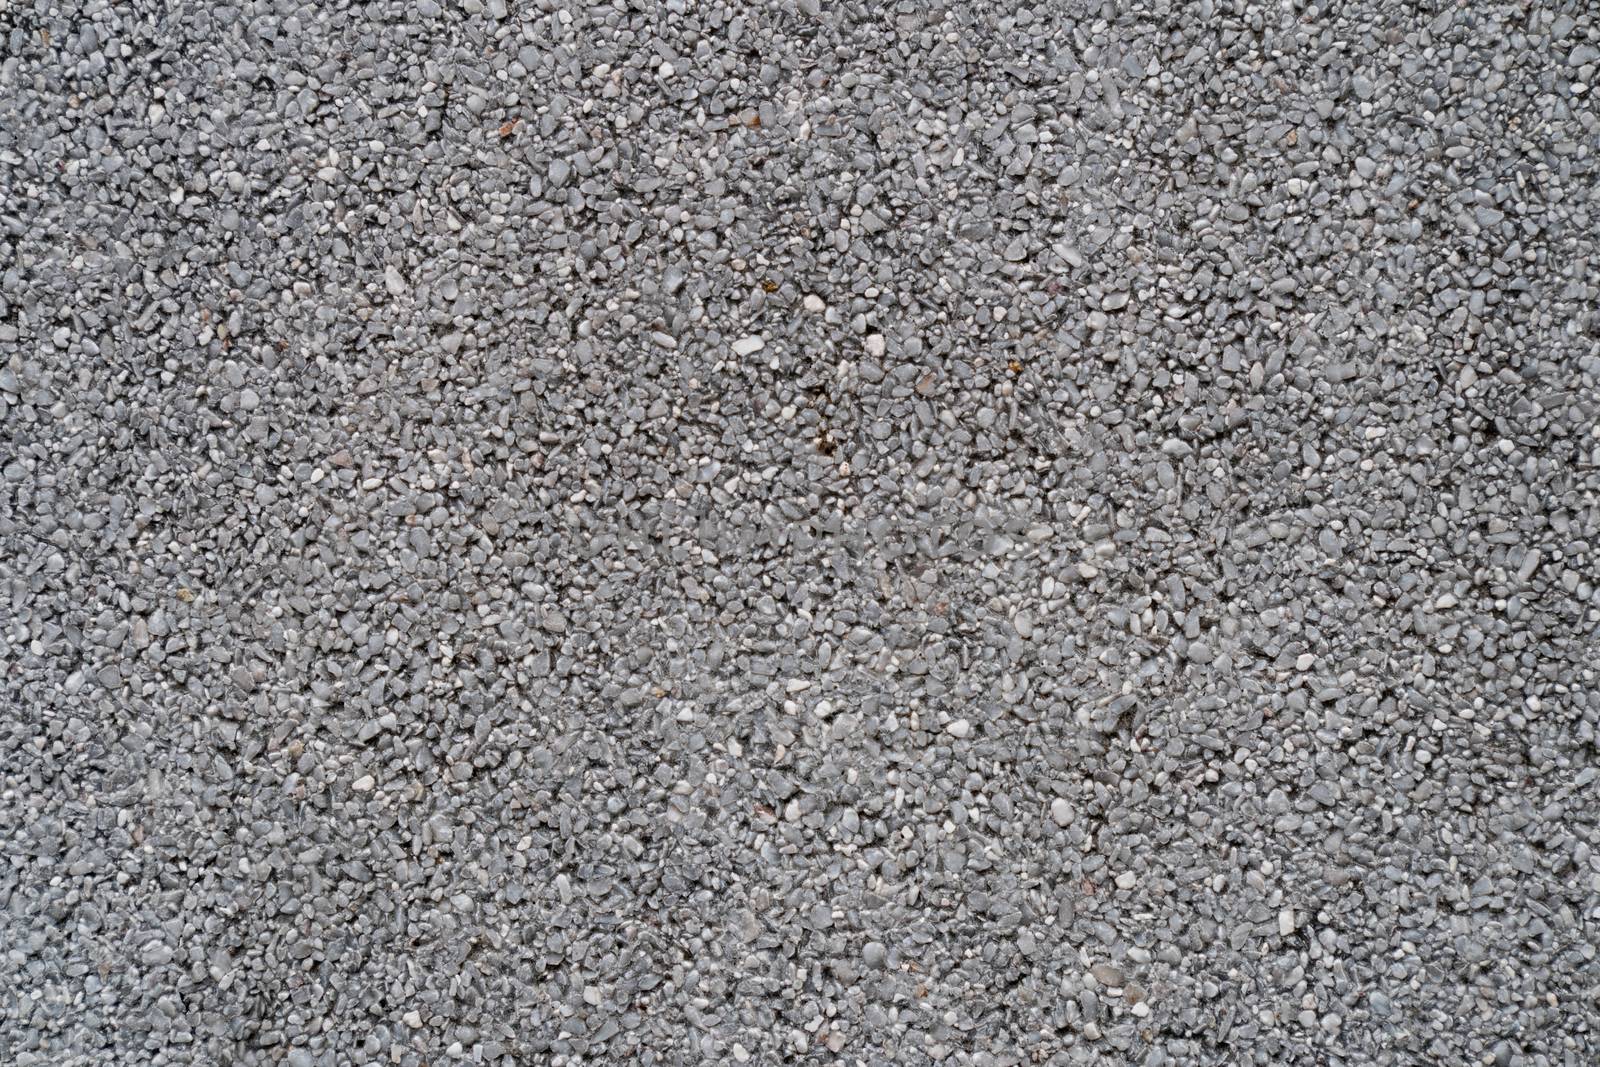 sand or small rock background